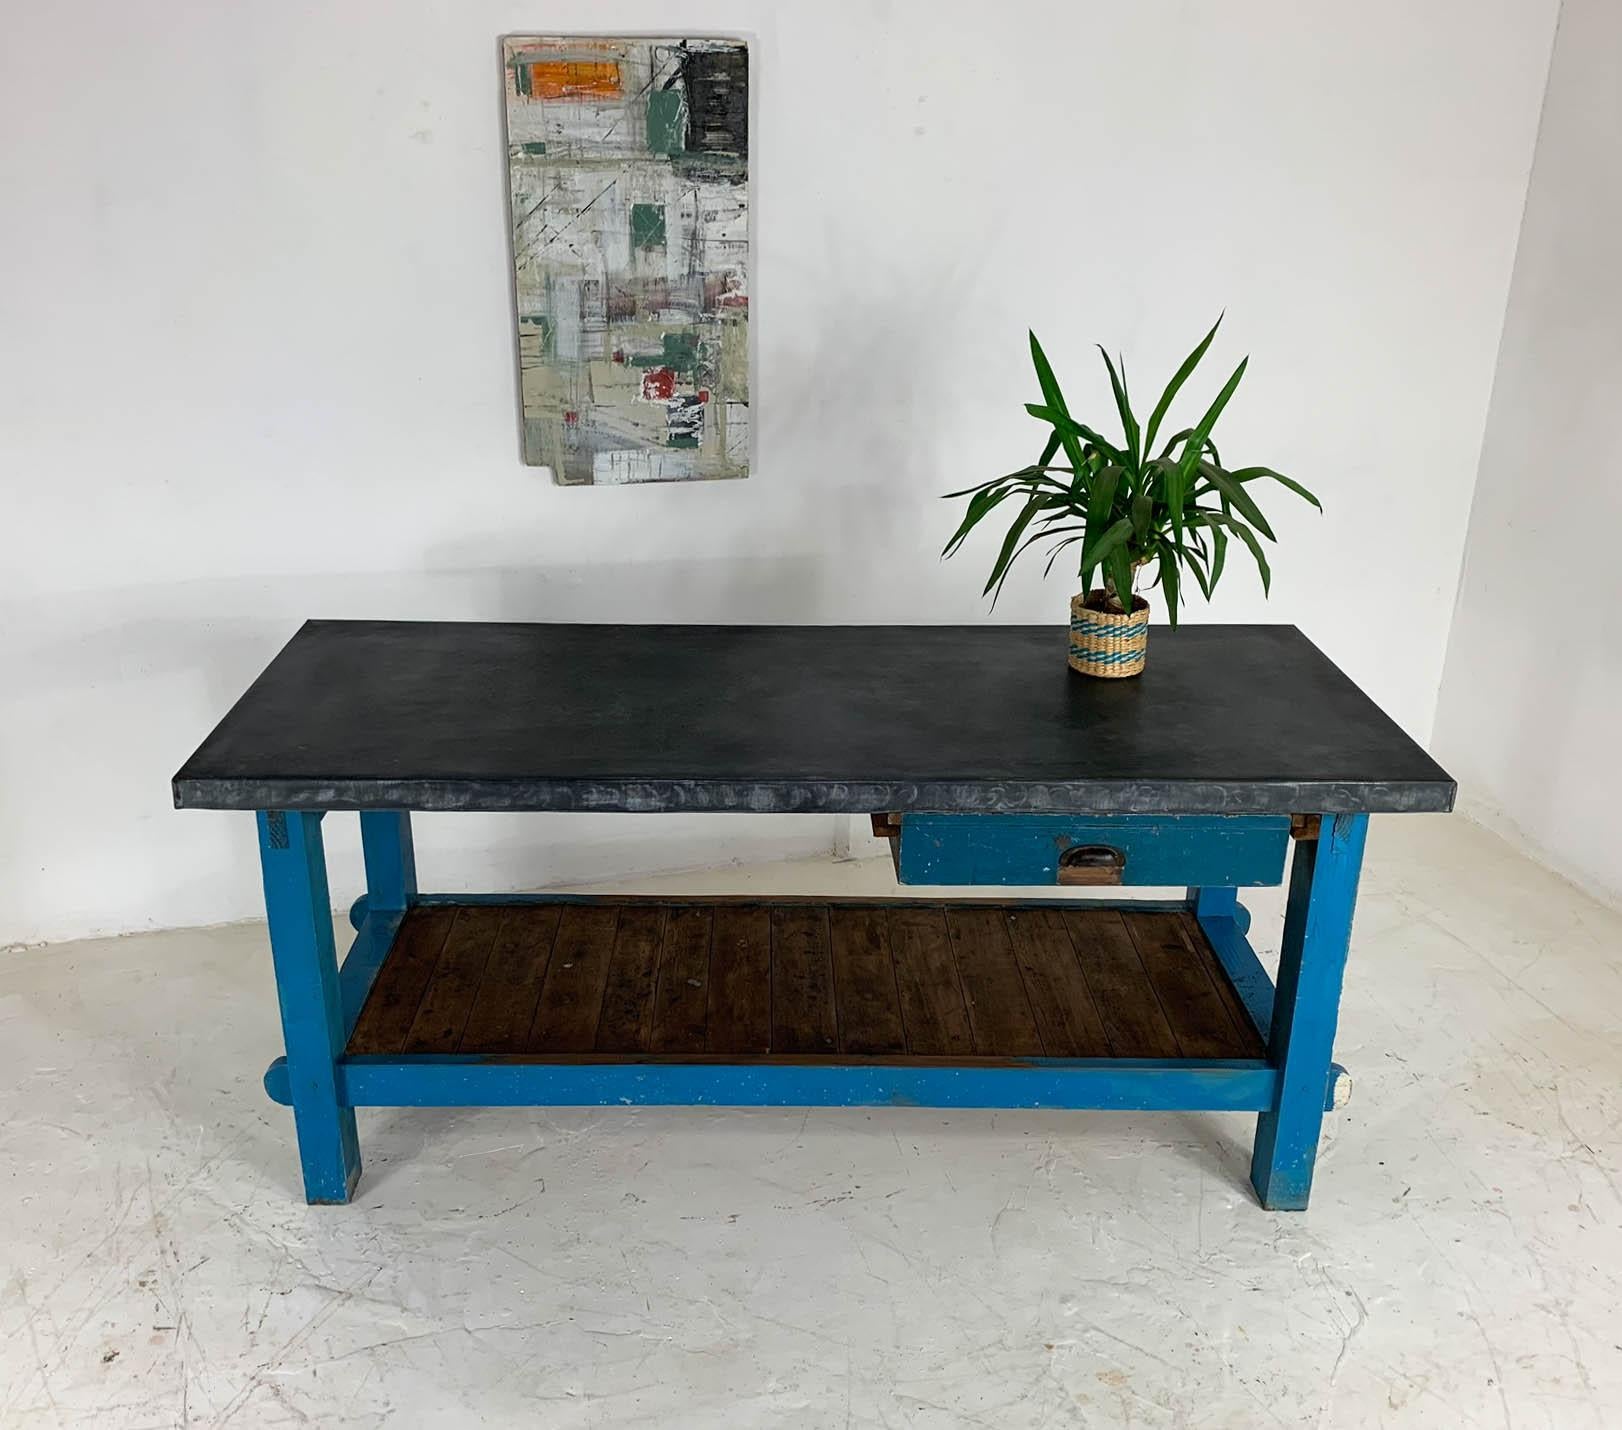 20th Century Vintage Industrial Painted Pine 'Potting Board' Table Workbench with Zinc Top